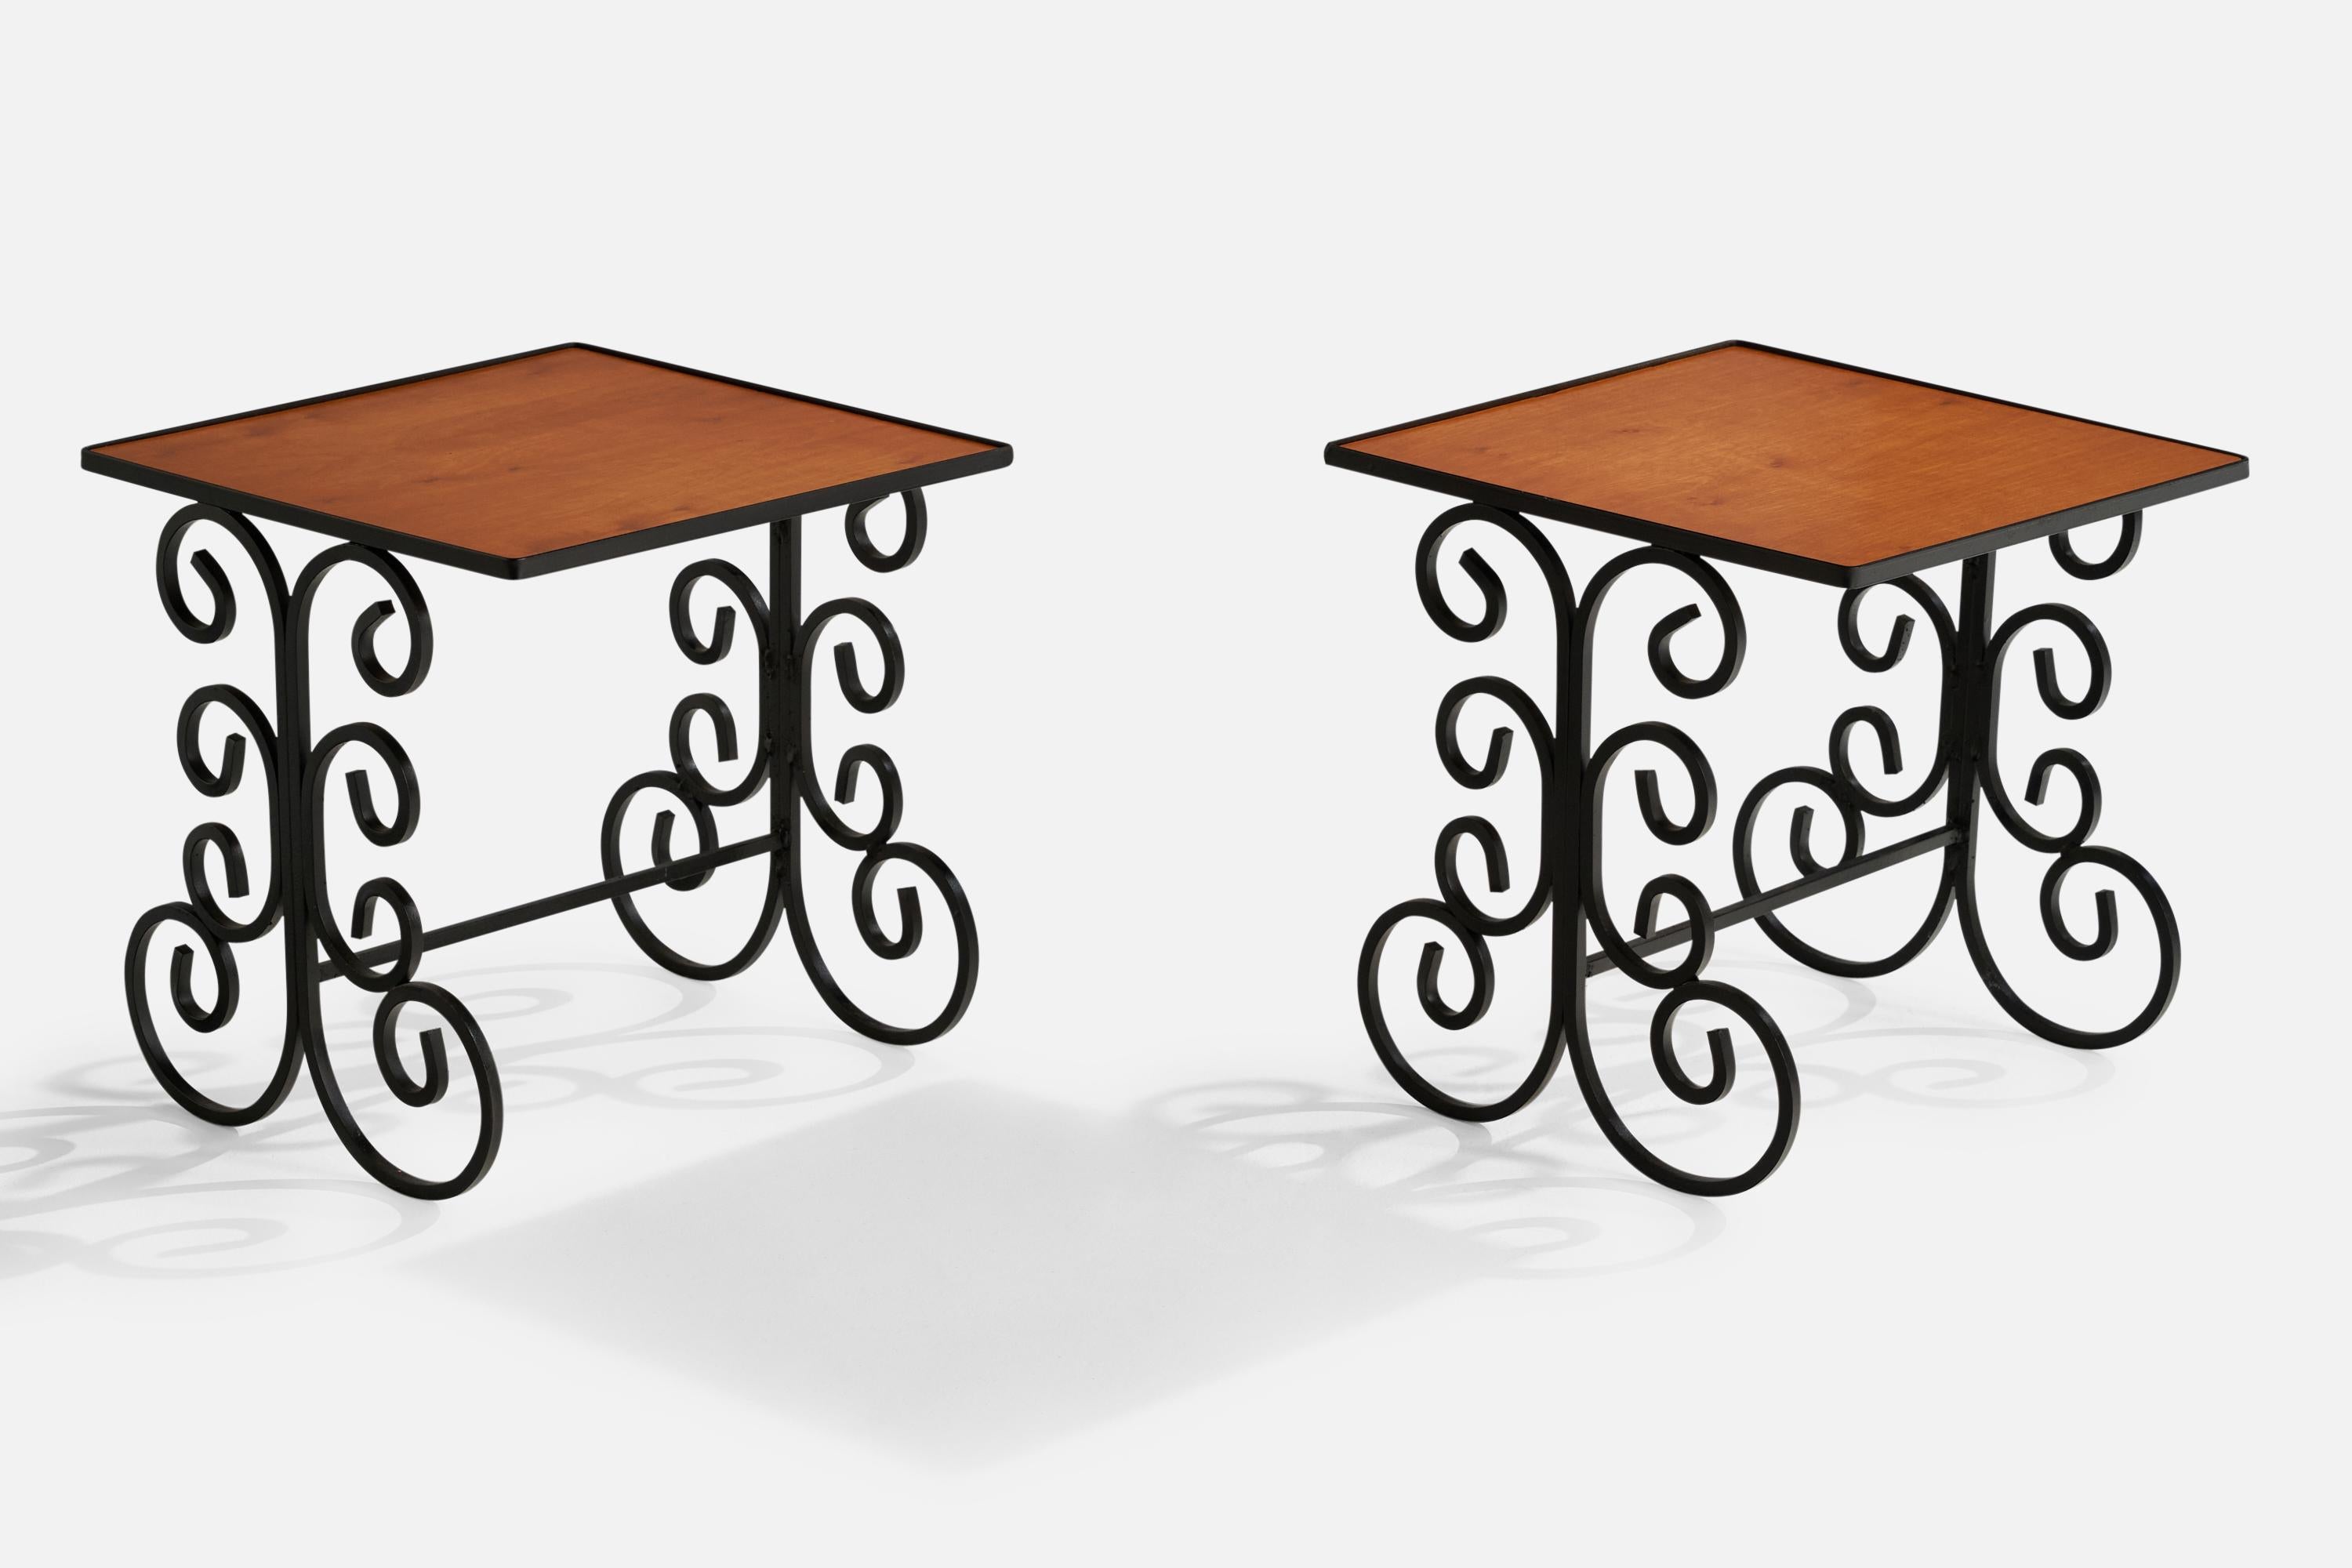 A pair of black-painted iron and maple side tables designed and produced in the US, c. 1940s.